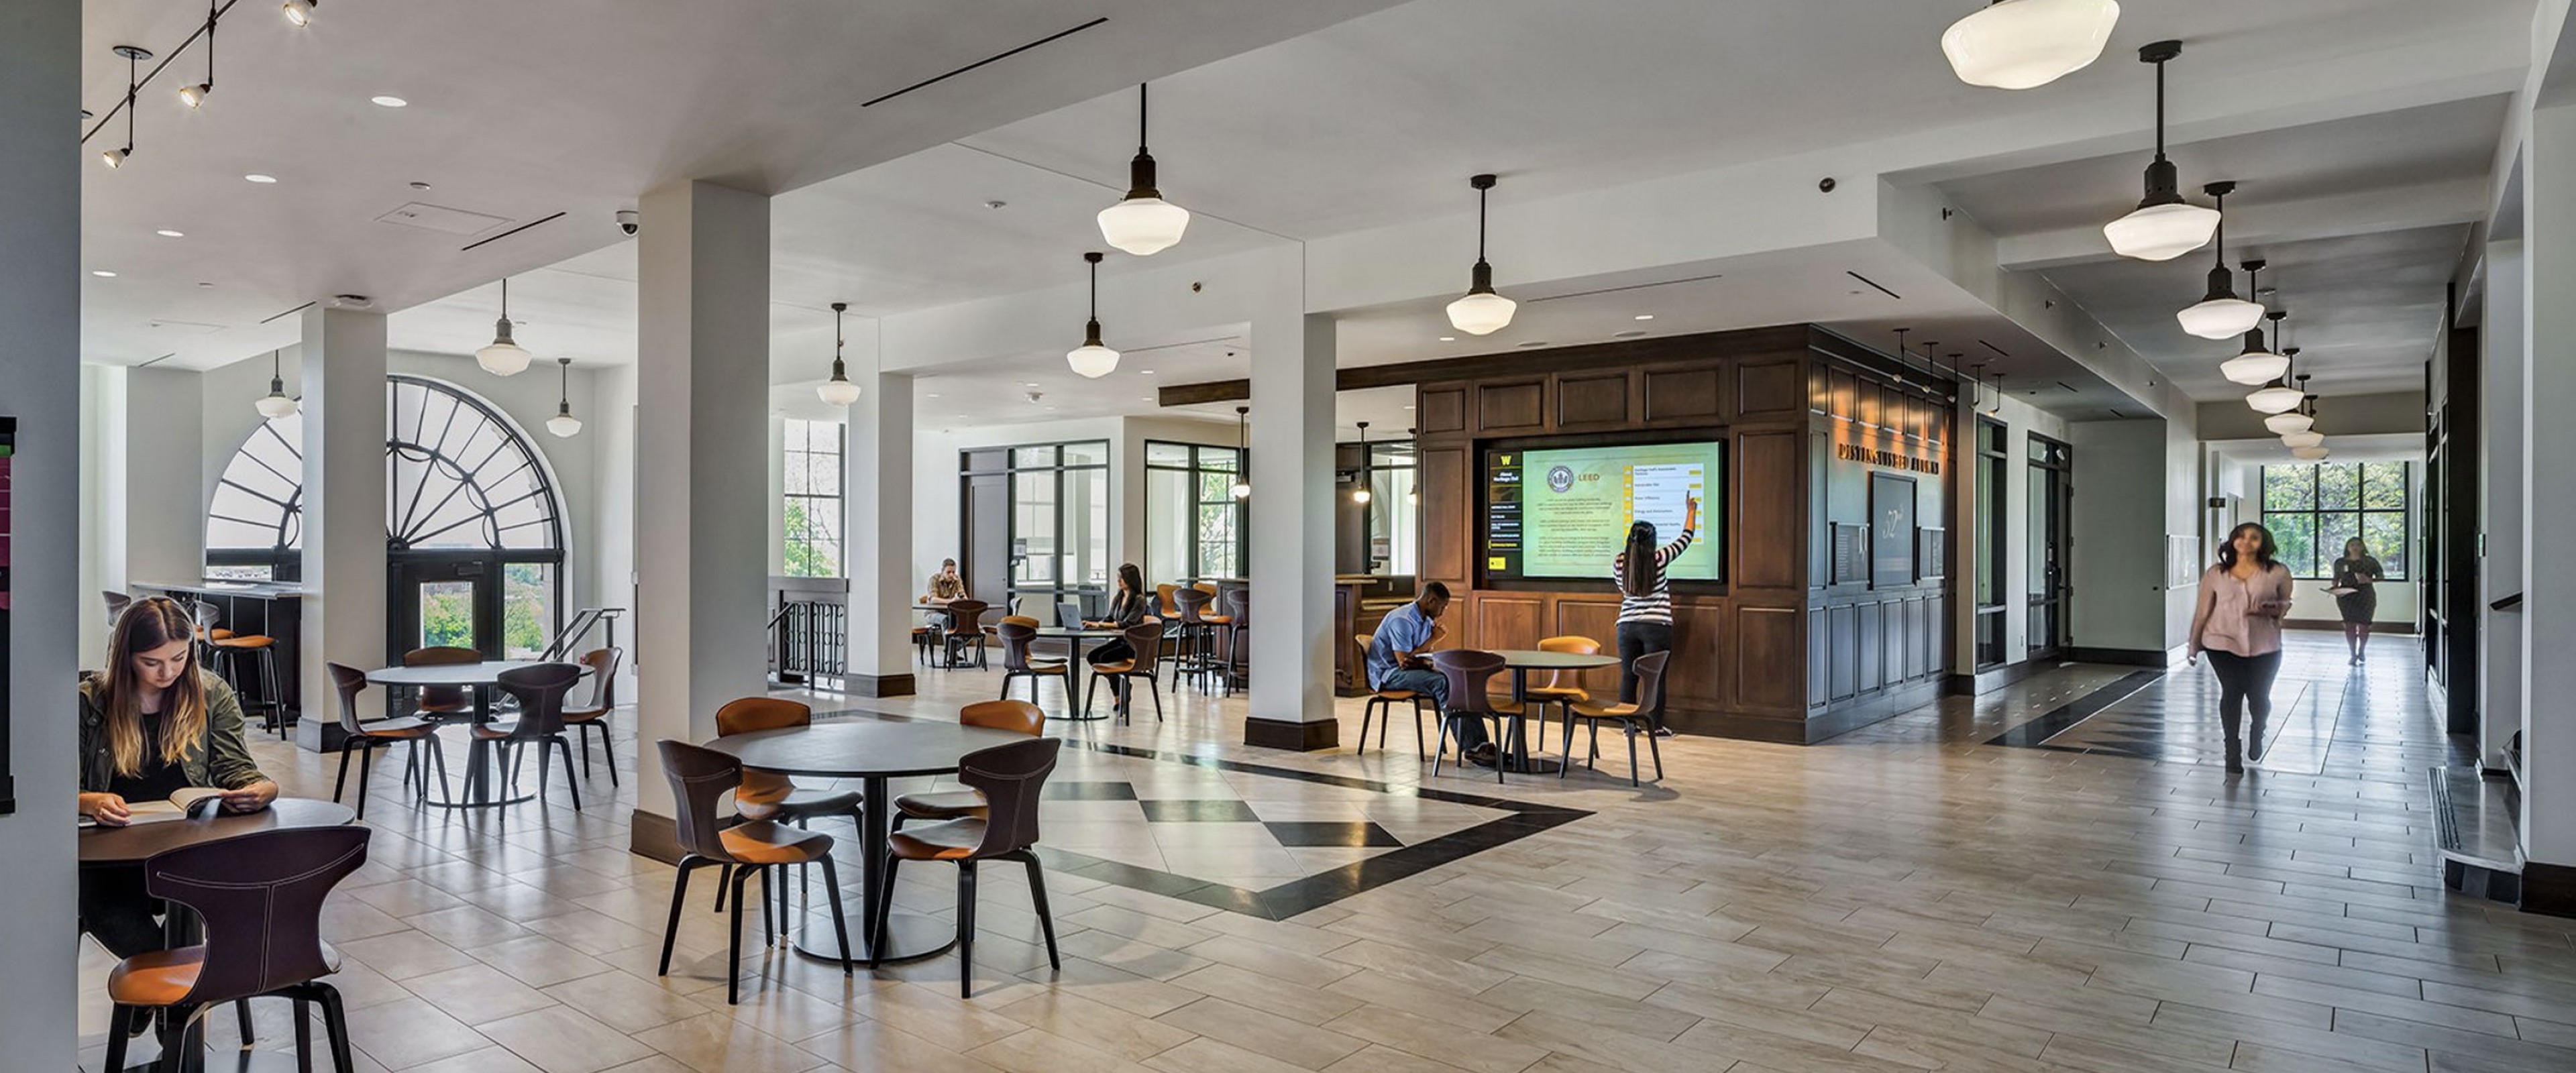 Interior of Heritage Hall lobby showing large open space and hardwood floors